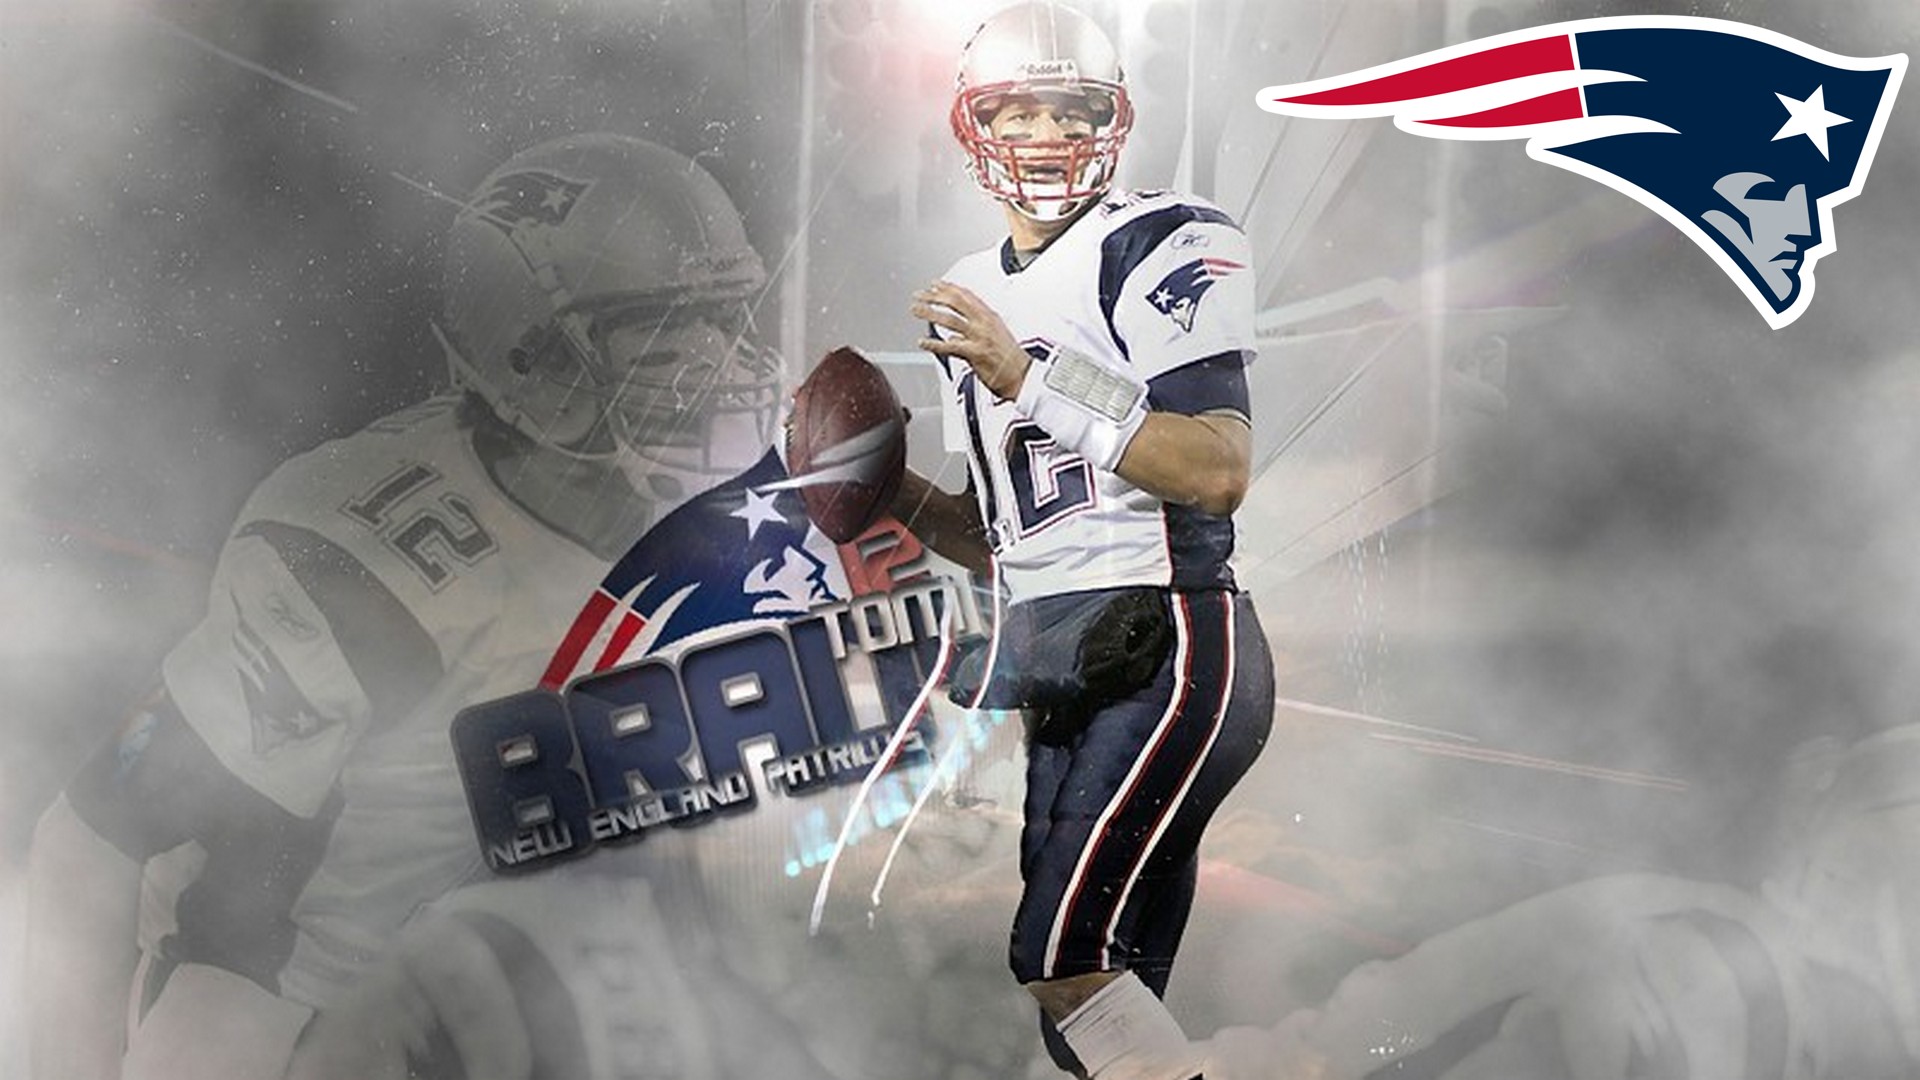 Wallpapers HD Tom Brady Super Bowl With Resolution 1920X1080 pixel. You can make this wallpaper for your Mac or Windows Desktop Background, iPhone, Android or Tablet and another Smartphone device for free